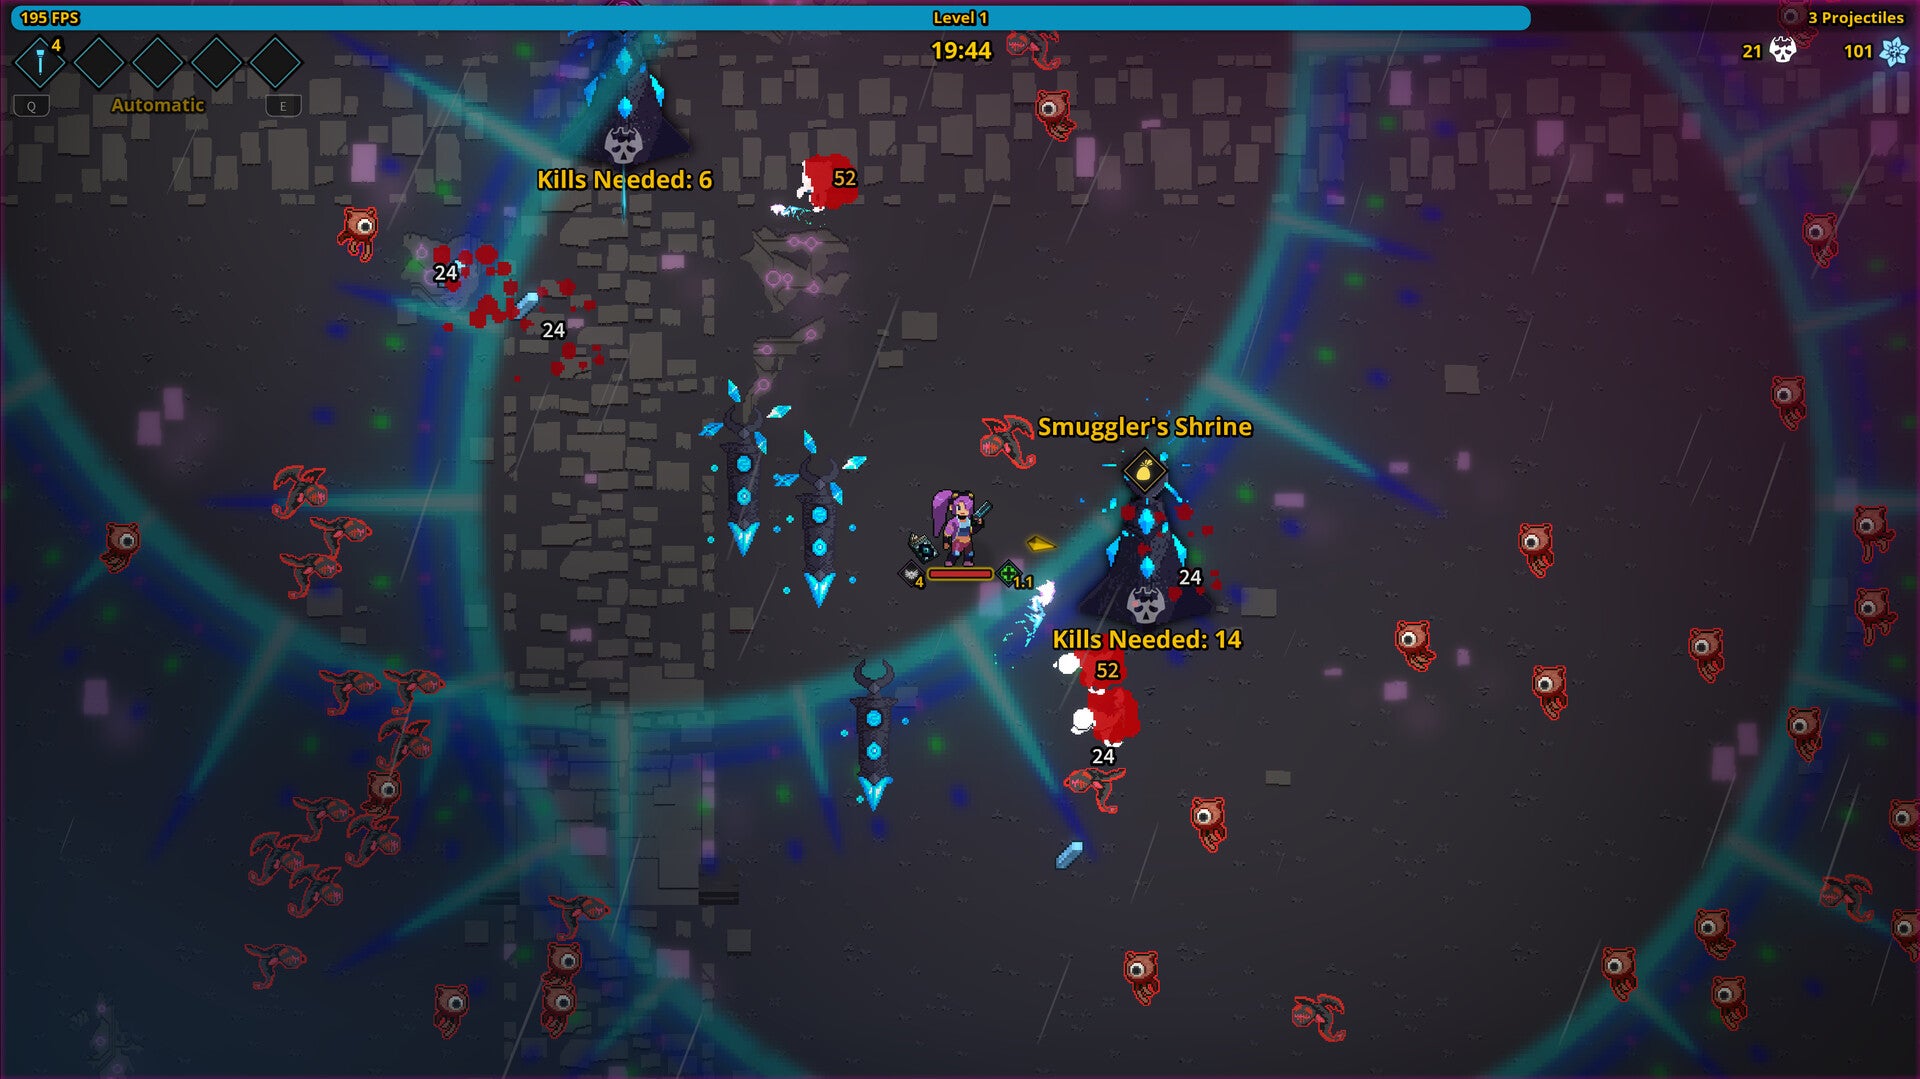 The player, a pink-haired spellcaster stands amongst loads of flying, red cyclops enemies in Spellbook Demonslayers.